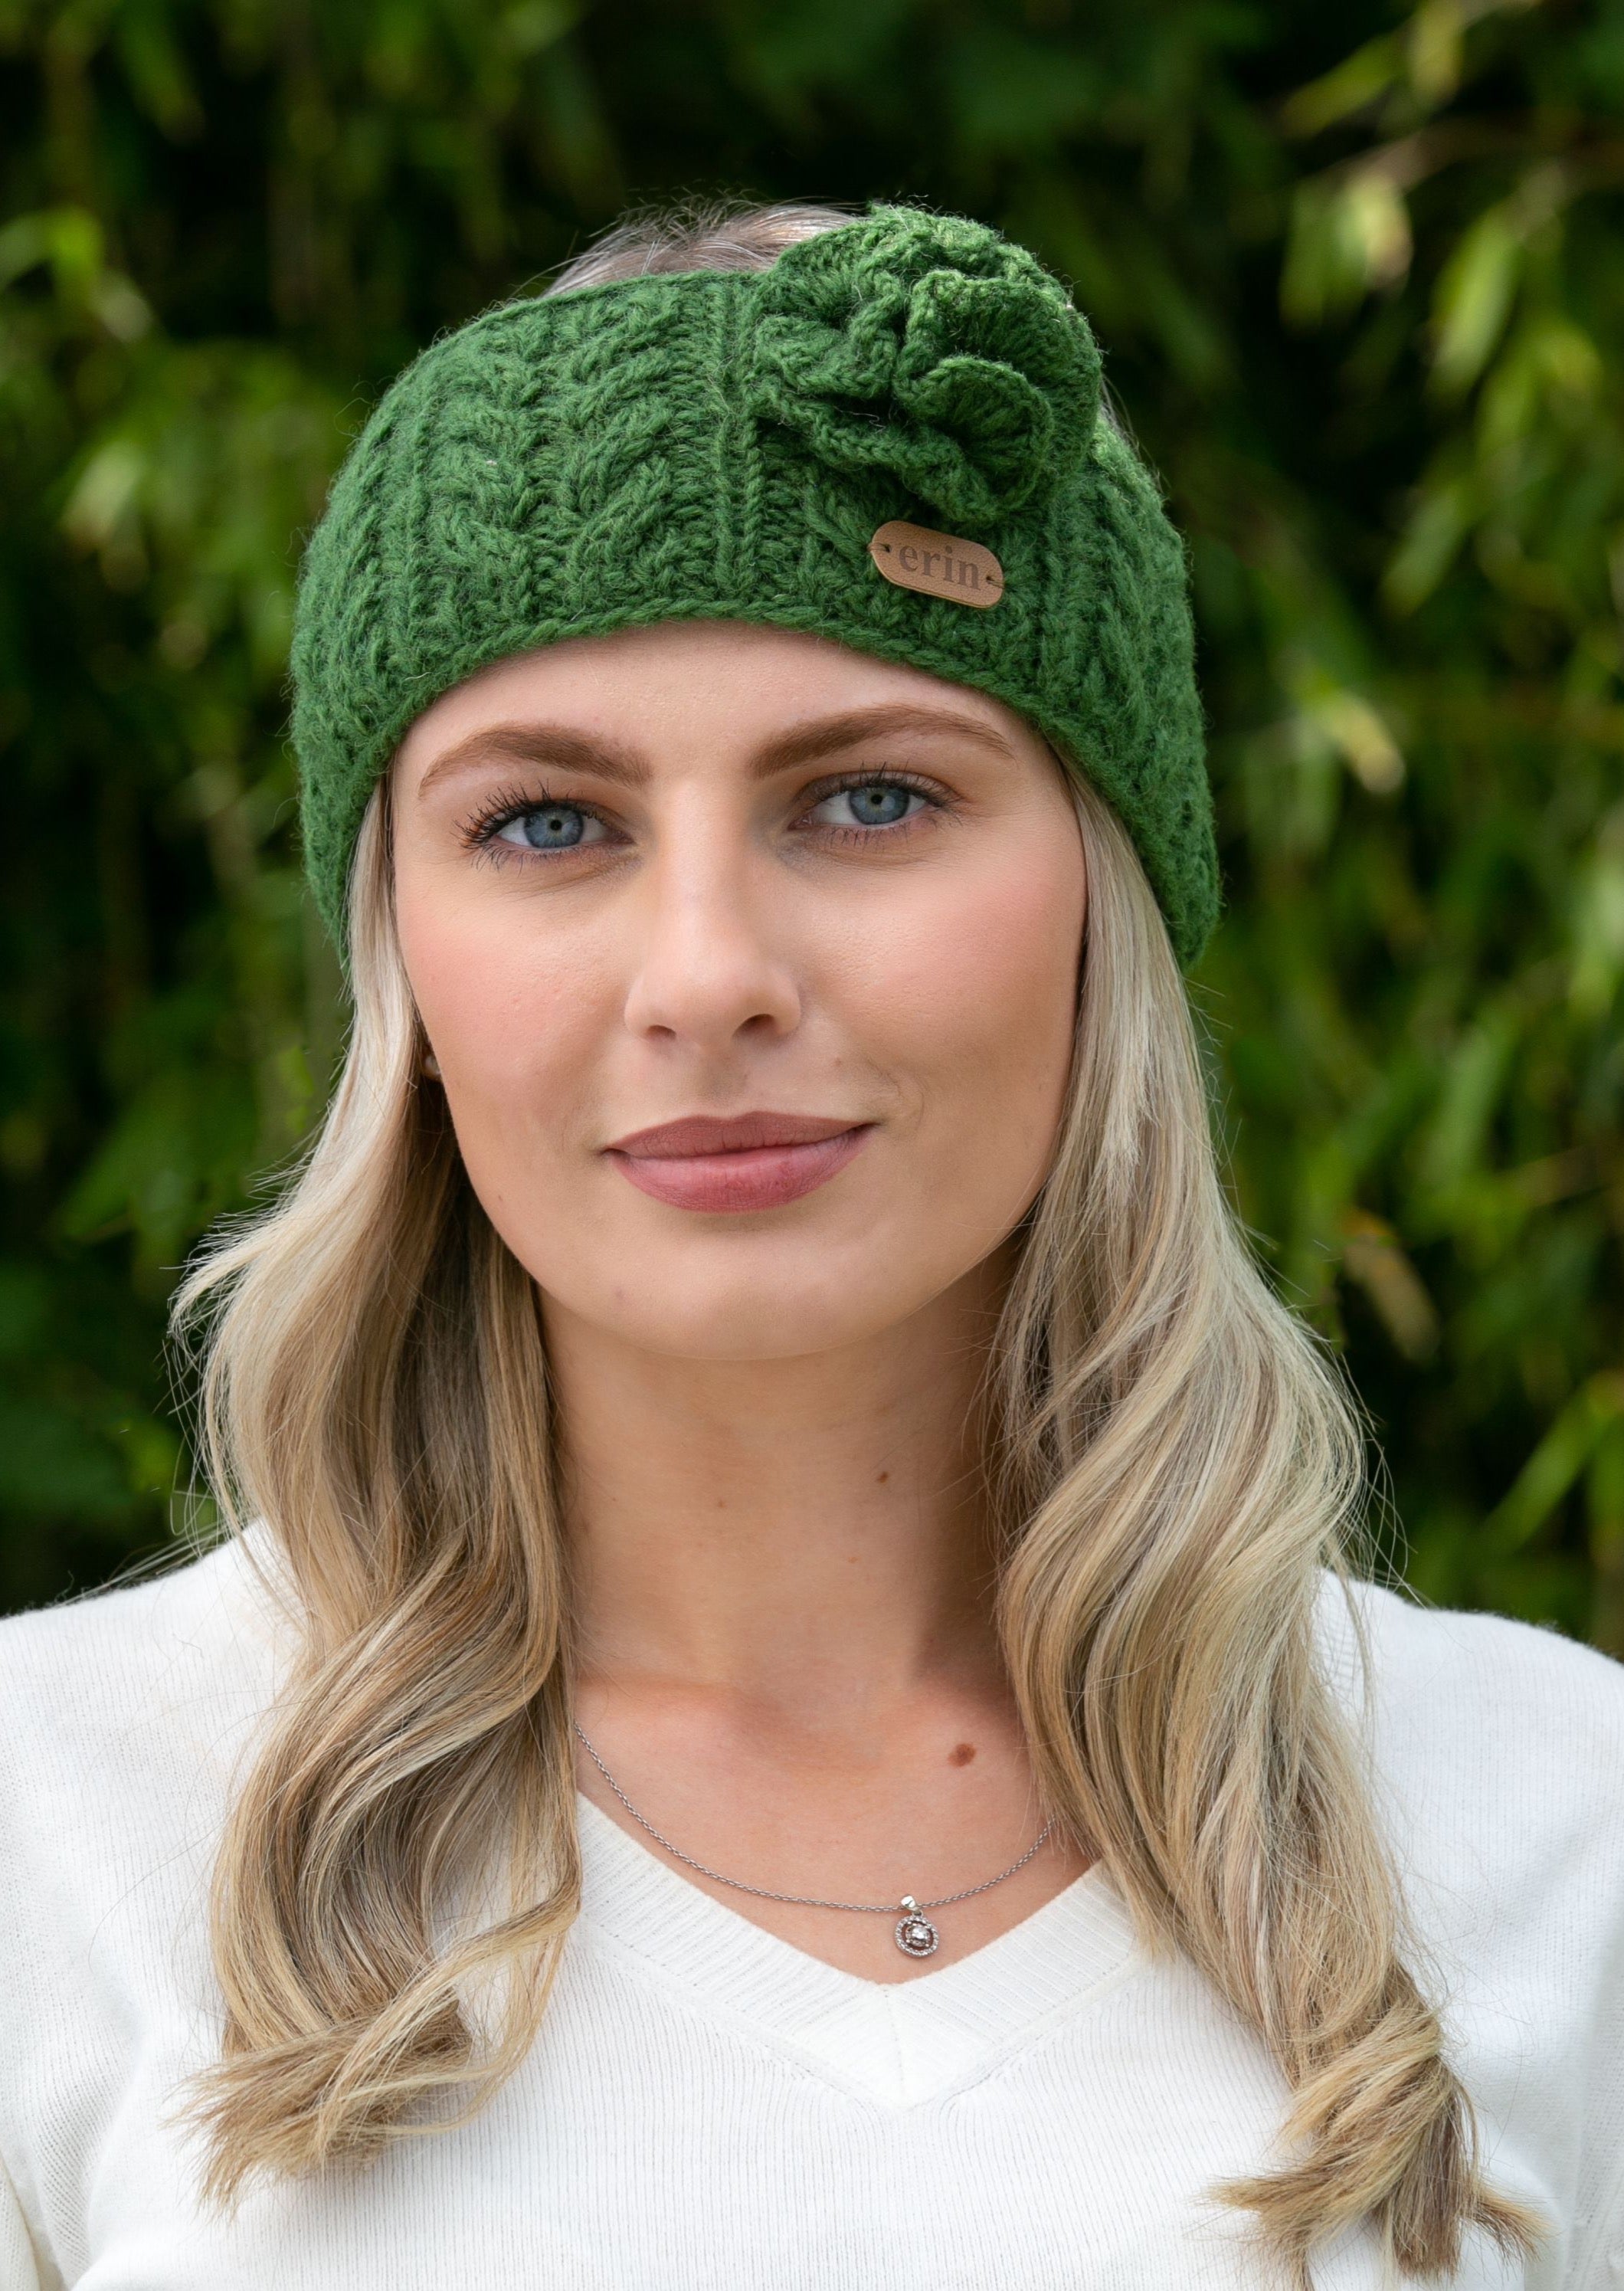 Aran Cable Knitted Green Wool Flower Headband